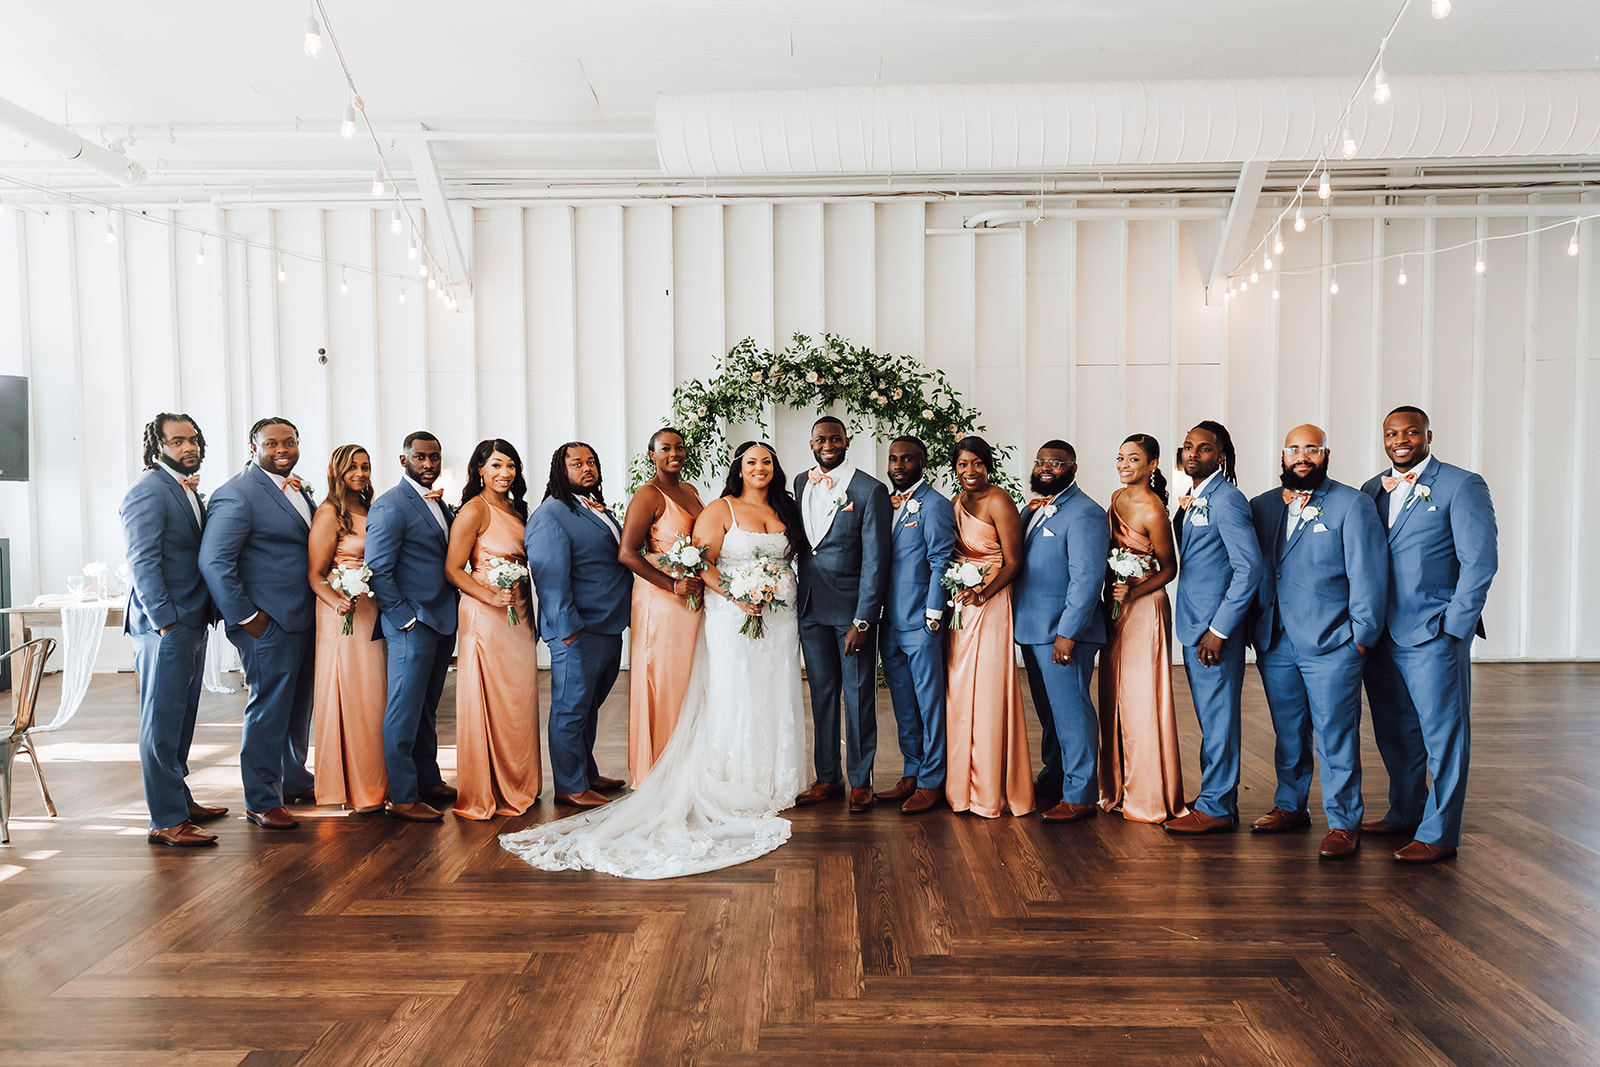 A large wedding party stands together in blue suits and pink dresses